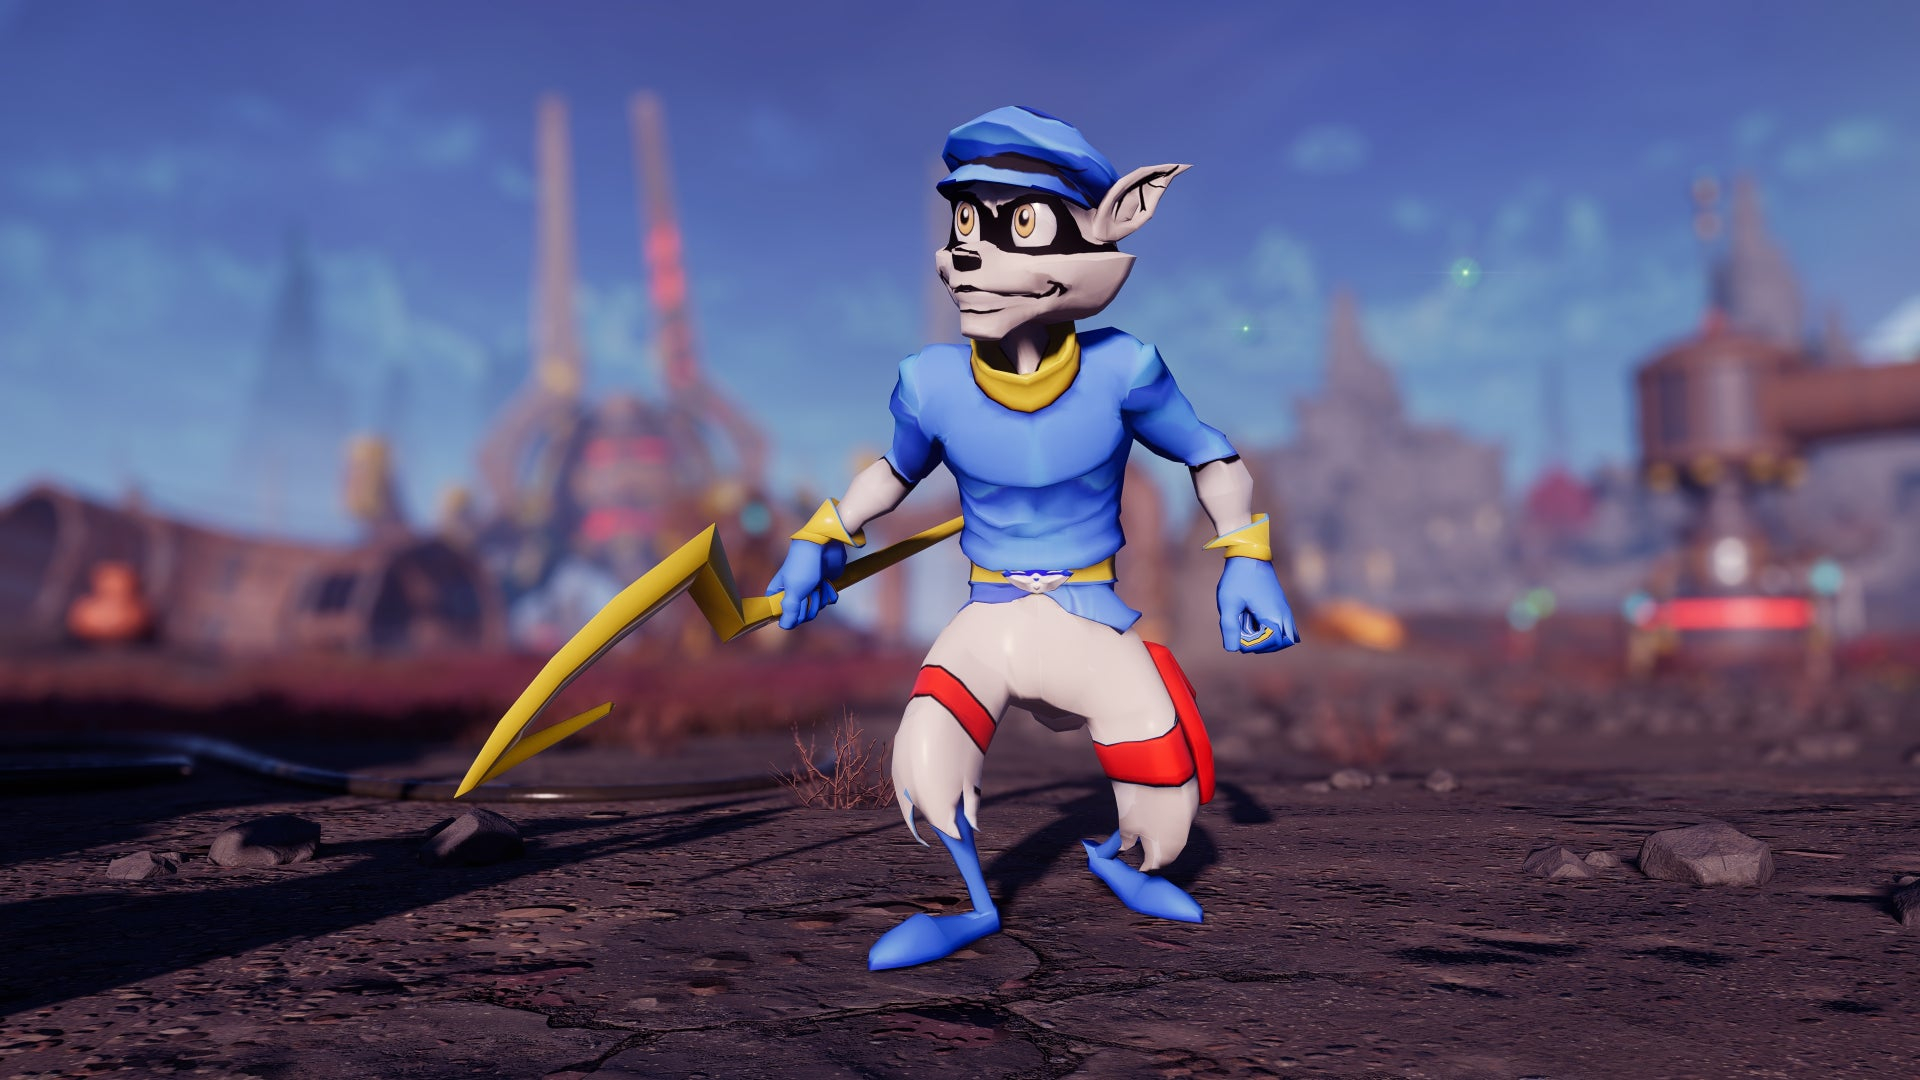 1920x1080 I Choose to Believe Sly Cooper's Cameo in Ratchet and Clank: Rift Apart is Ca